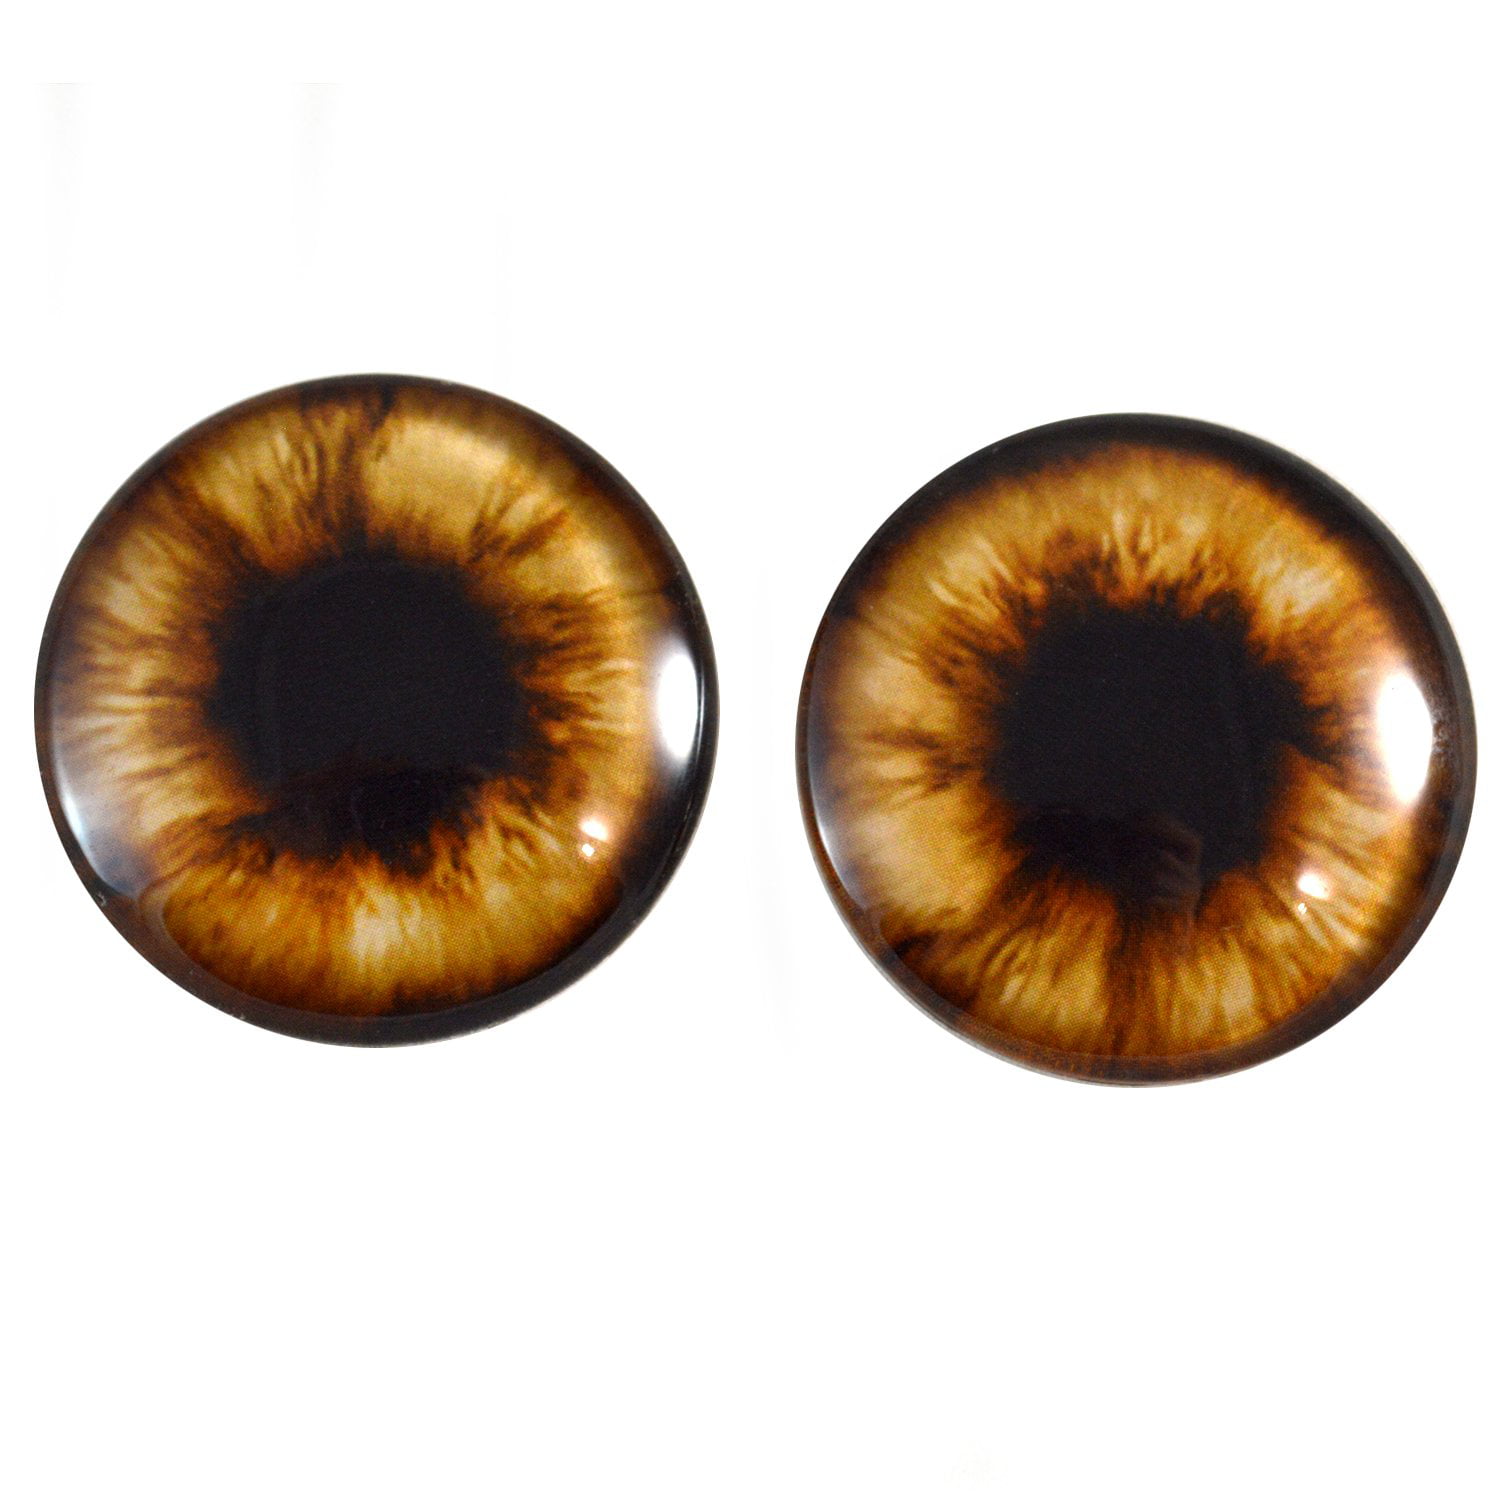 a pair vintage solid Glass Eyes size 24 mm teady bear taxidermy age 1910 Art A93 